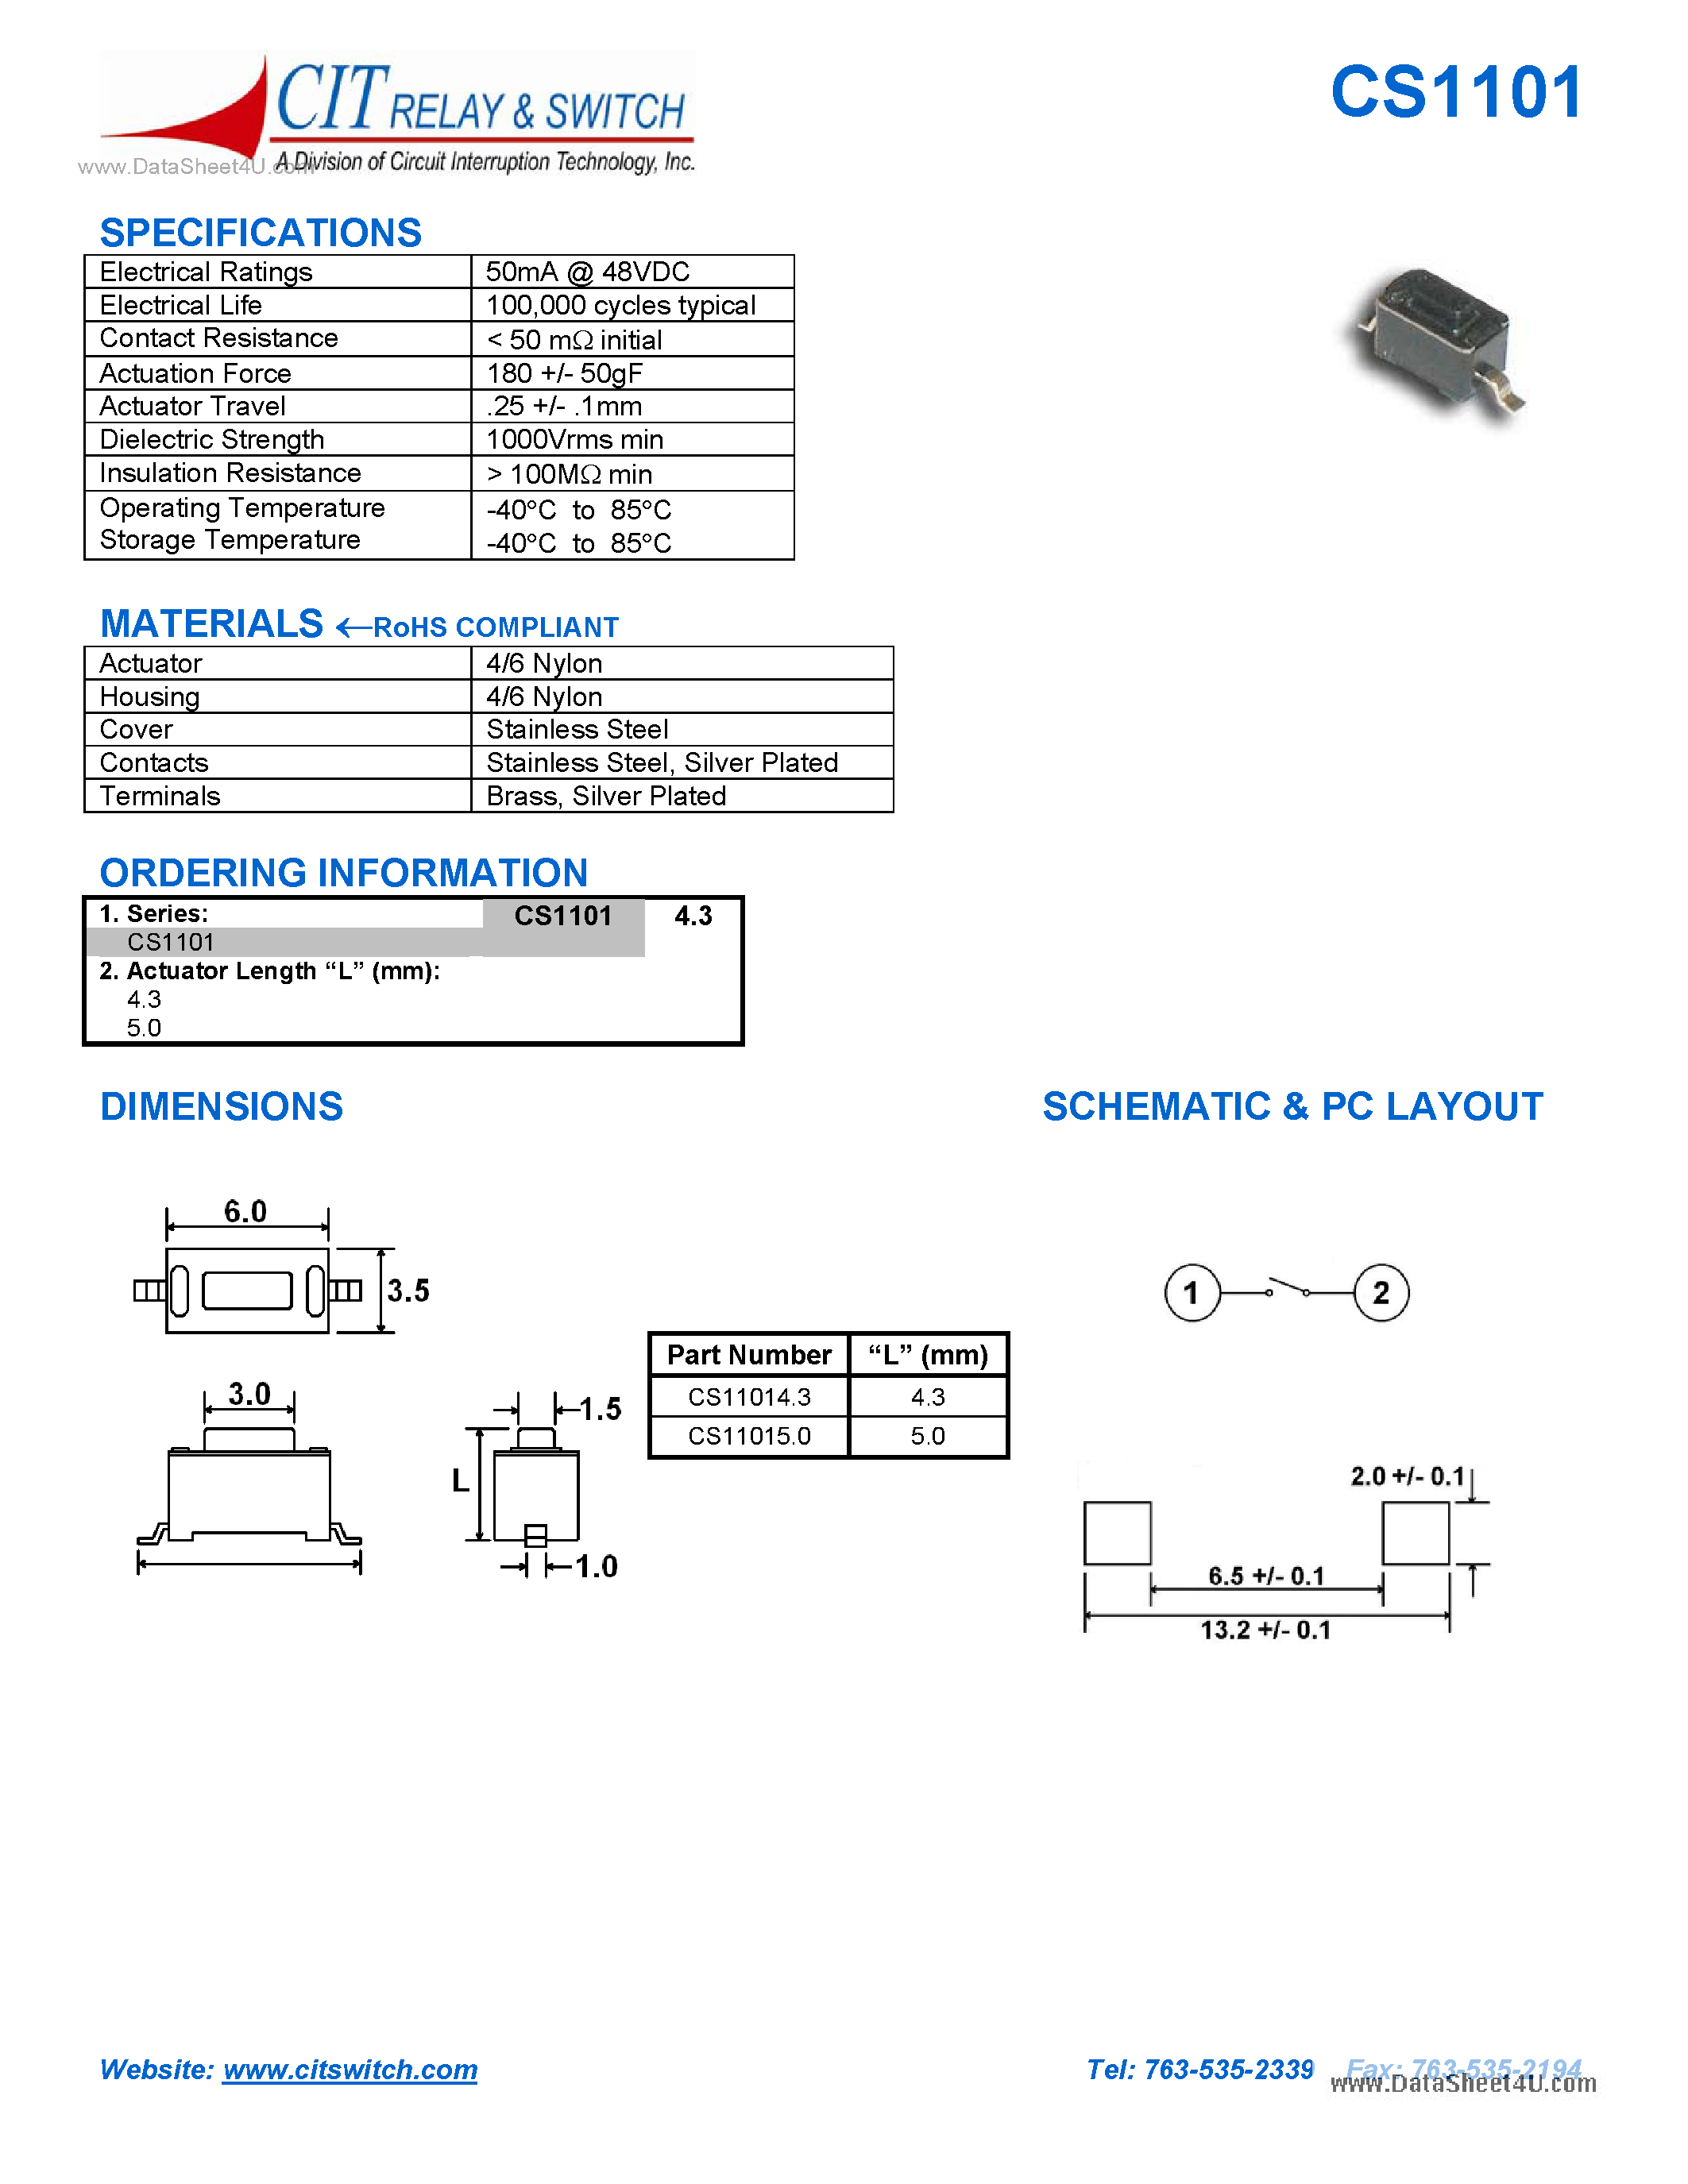 Datasheet CS1101 - DIMENSIONS SCHEMATIC & PC LAYOUT page 1